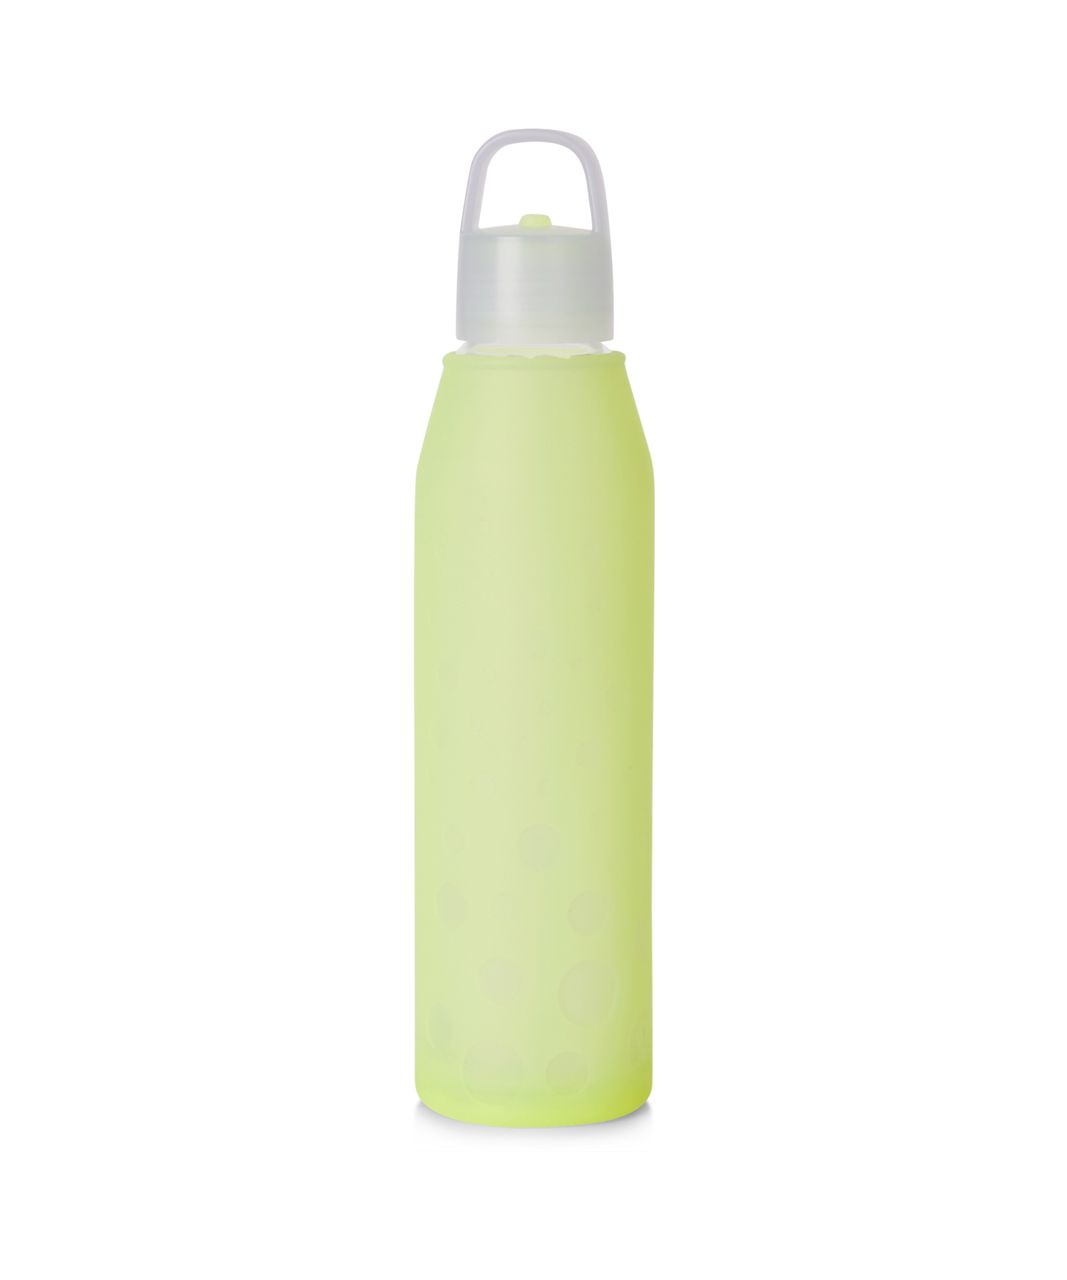 Lululemon Athletica H2Om Glass Water Bottle Silicone Sleeve Pink